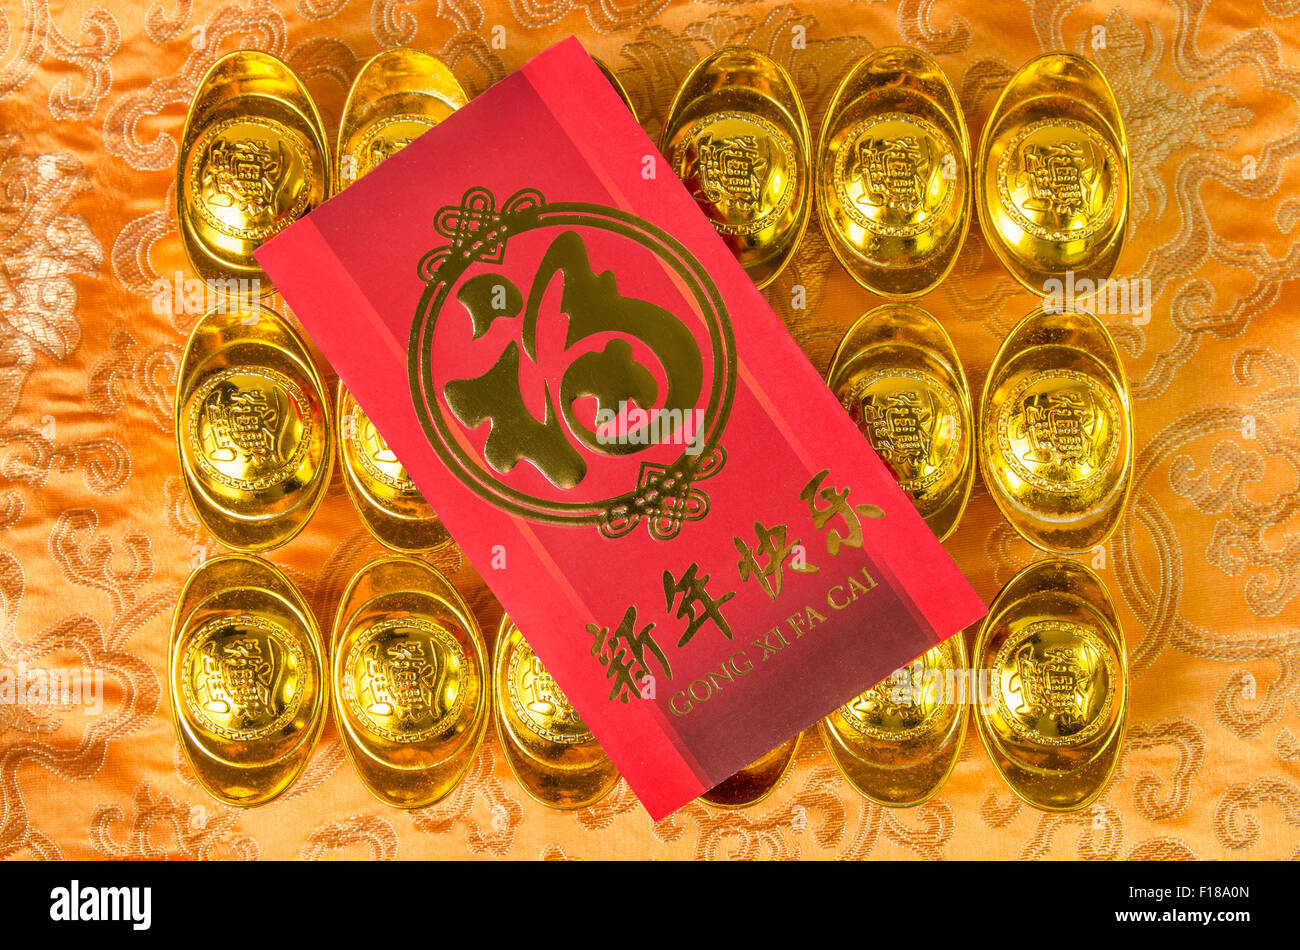 Chinese gold ingots (Foreign text means blessing) decoration Stock Photo